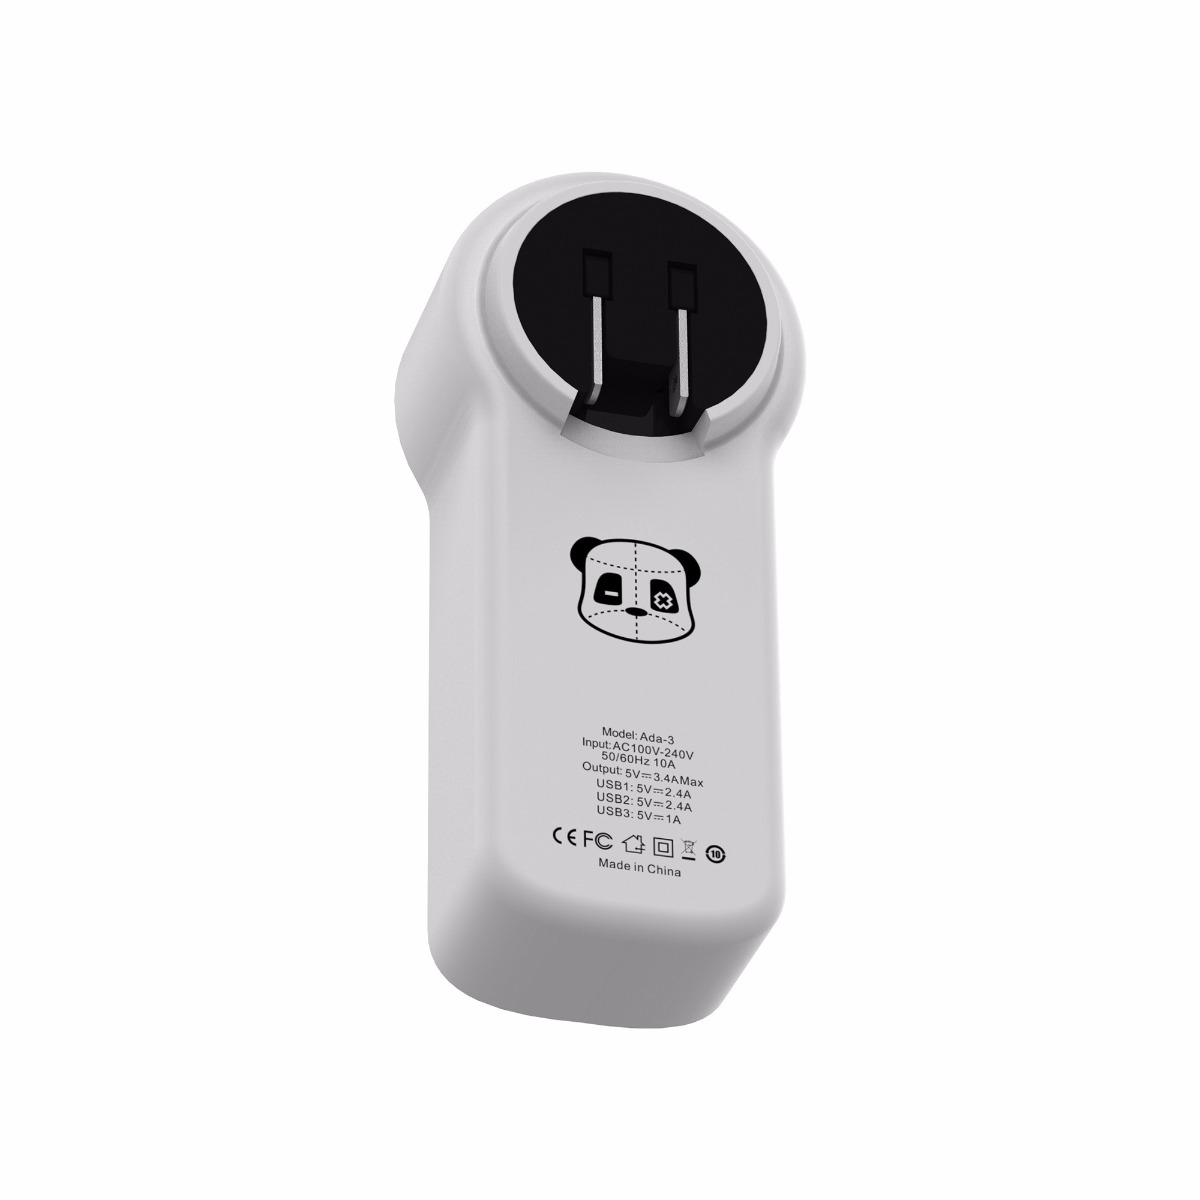 Patch Panda Ada-3 USB Wall Adapter for Mobile Phone